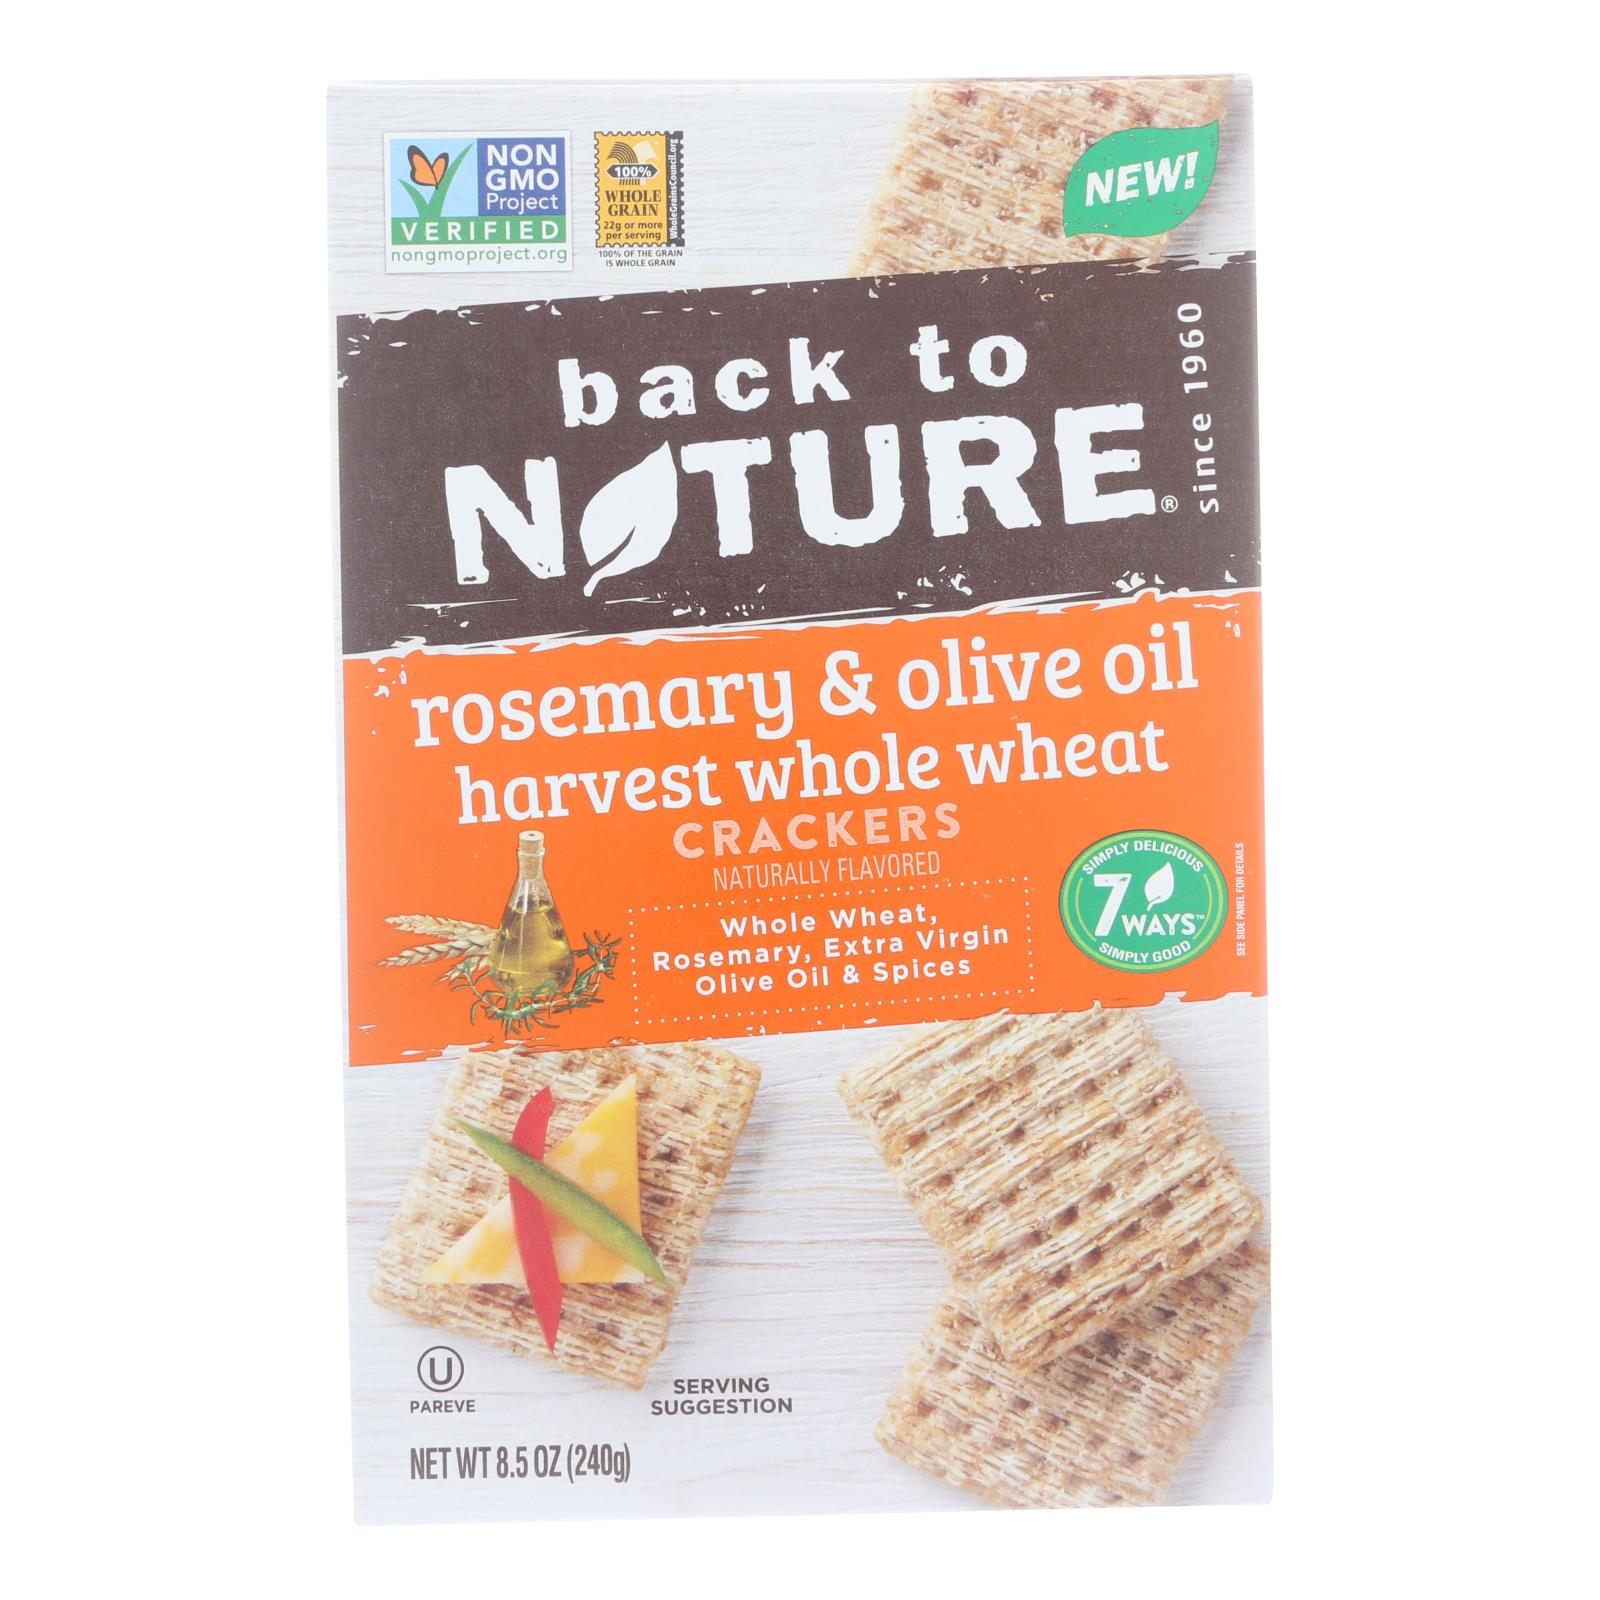 Back To Nature - Crackers Rsmry&olive Oil - 12개 묶음상품 - 8.5 OZ